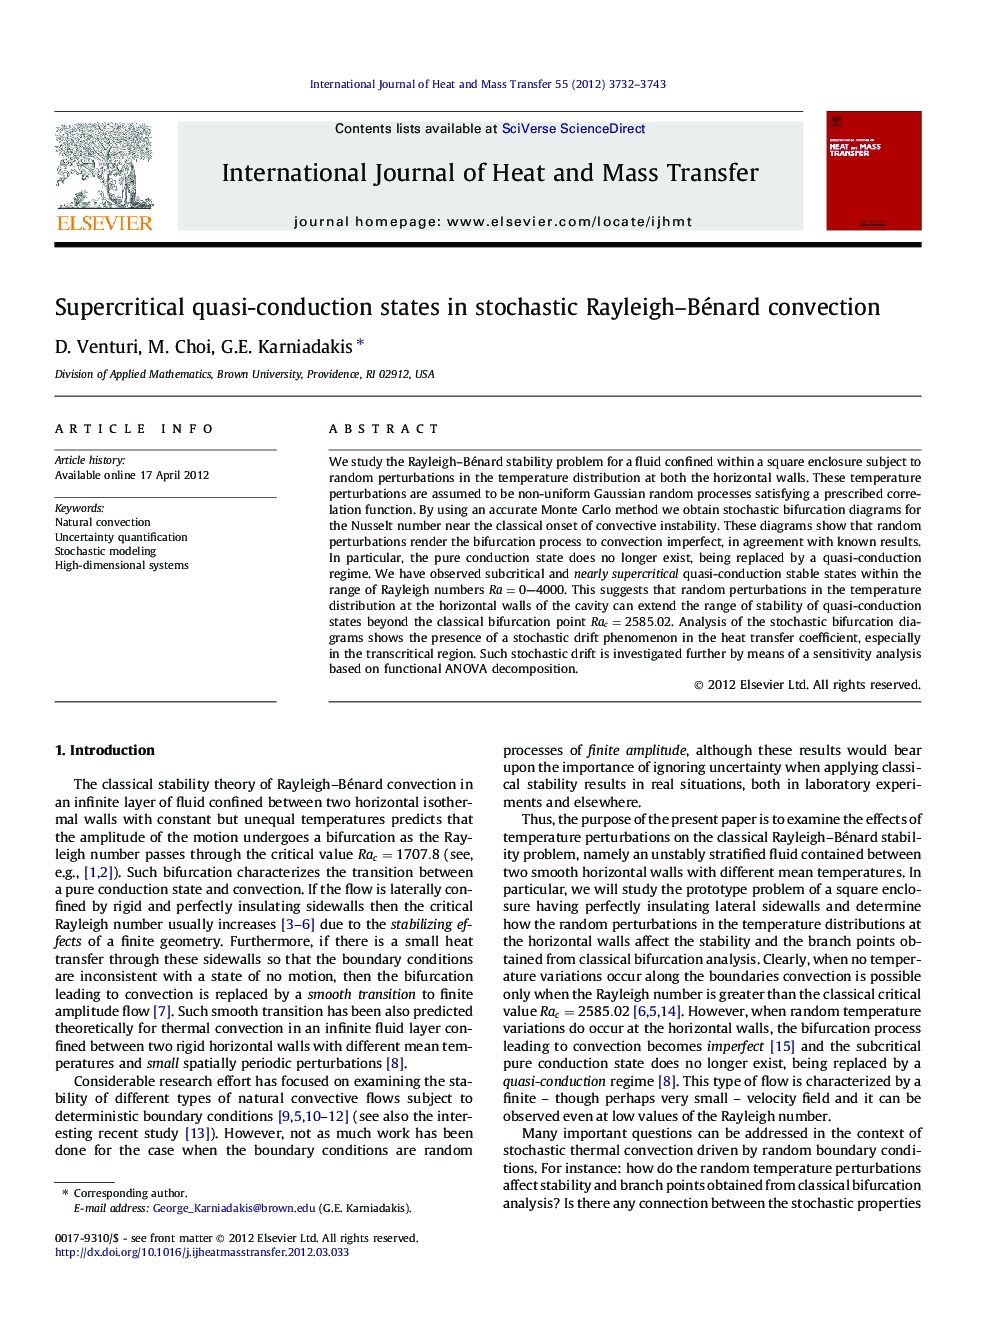 Supercritical quasi-conduction states in stochastic Rayleigh–Bénard convection